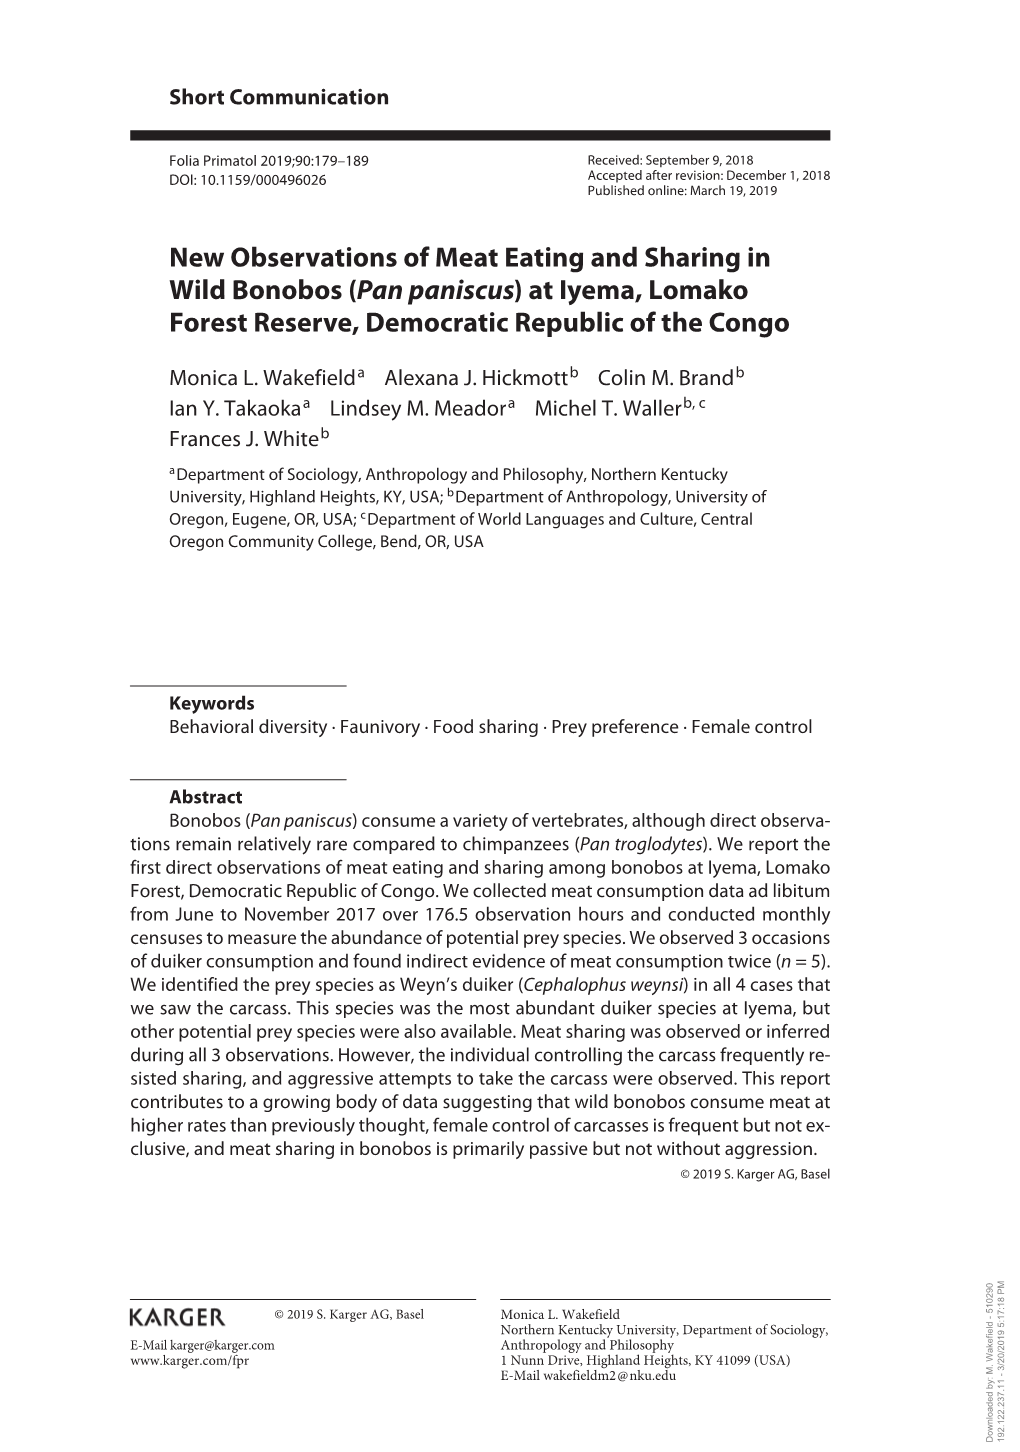 New Observations of Meat Eating and Sharing in Wild Bonobos (Pan Paniscus) at Iyema, Lomako Forest Reserve, Democratic Republic of the Congo